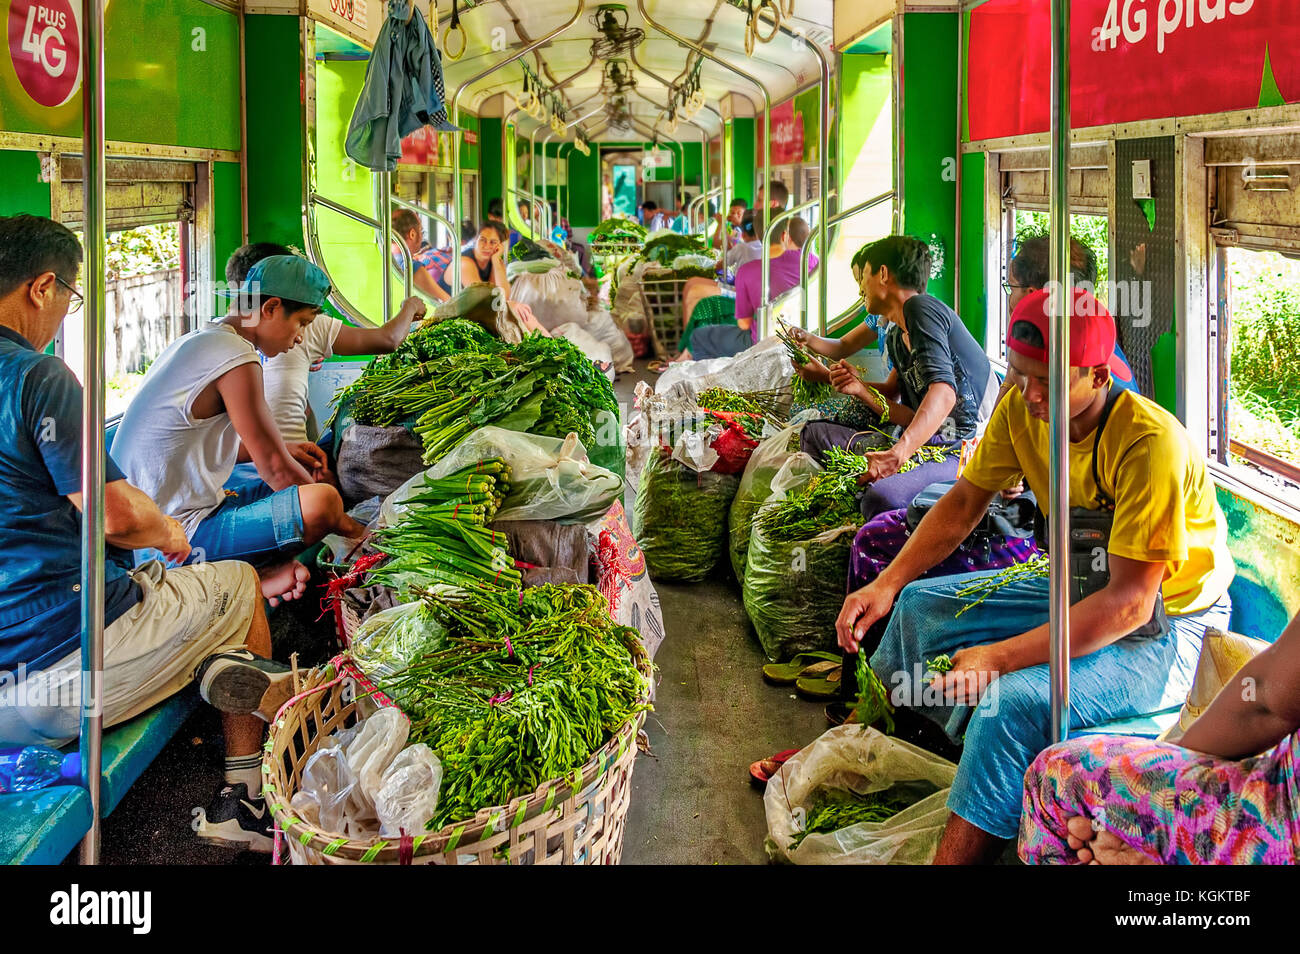 Yangon Circular Line, Myanmar - Oct. 22, 2017: Greengrocers board the train with vegetables in sacks and rattan baskets to cut and trim them on board. Stock Photo